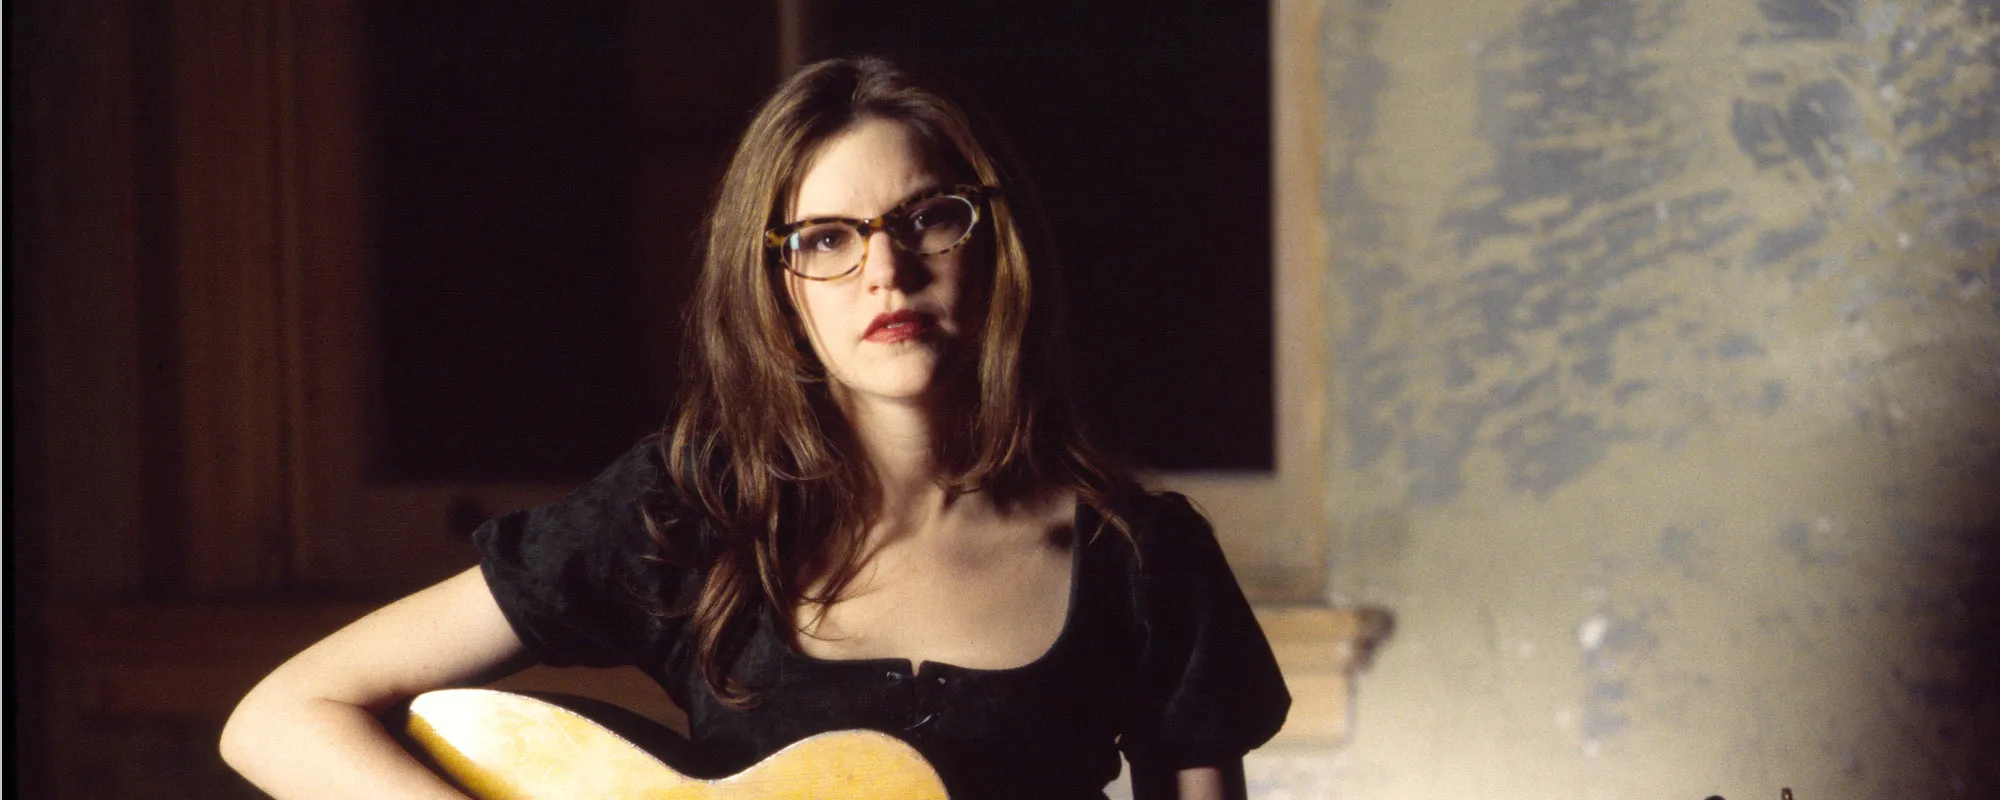 Catching Up With “Stay (I Missed You)” Singer Lisa Loeb